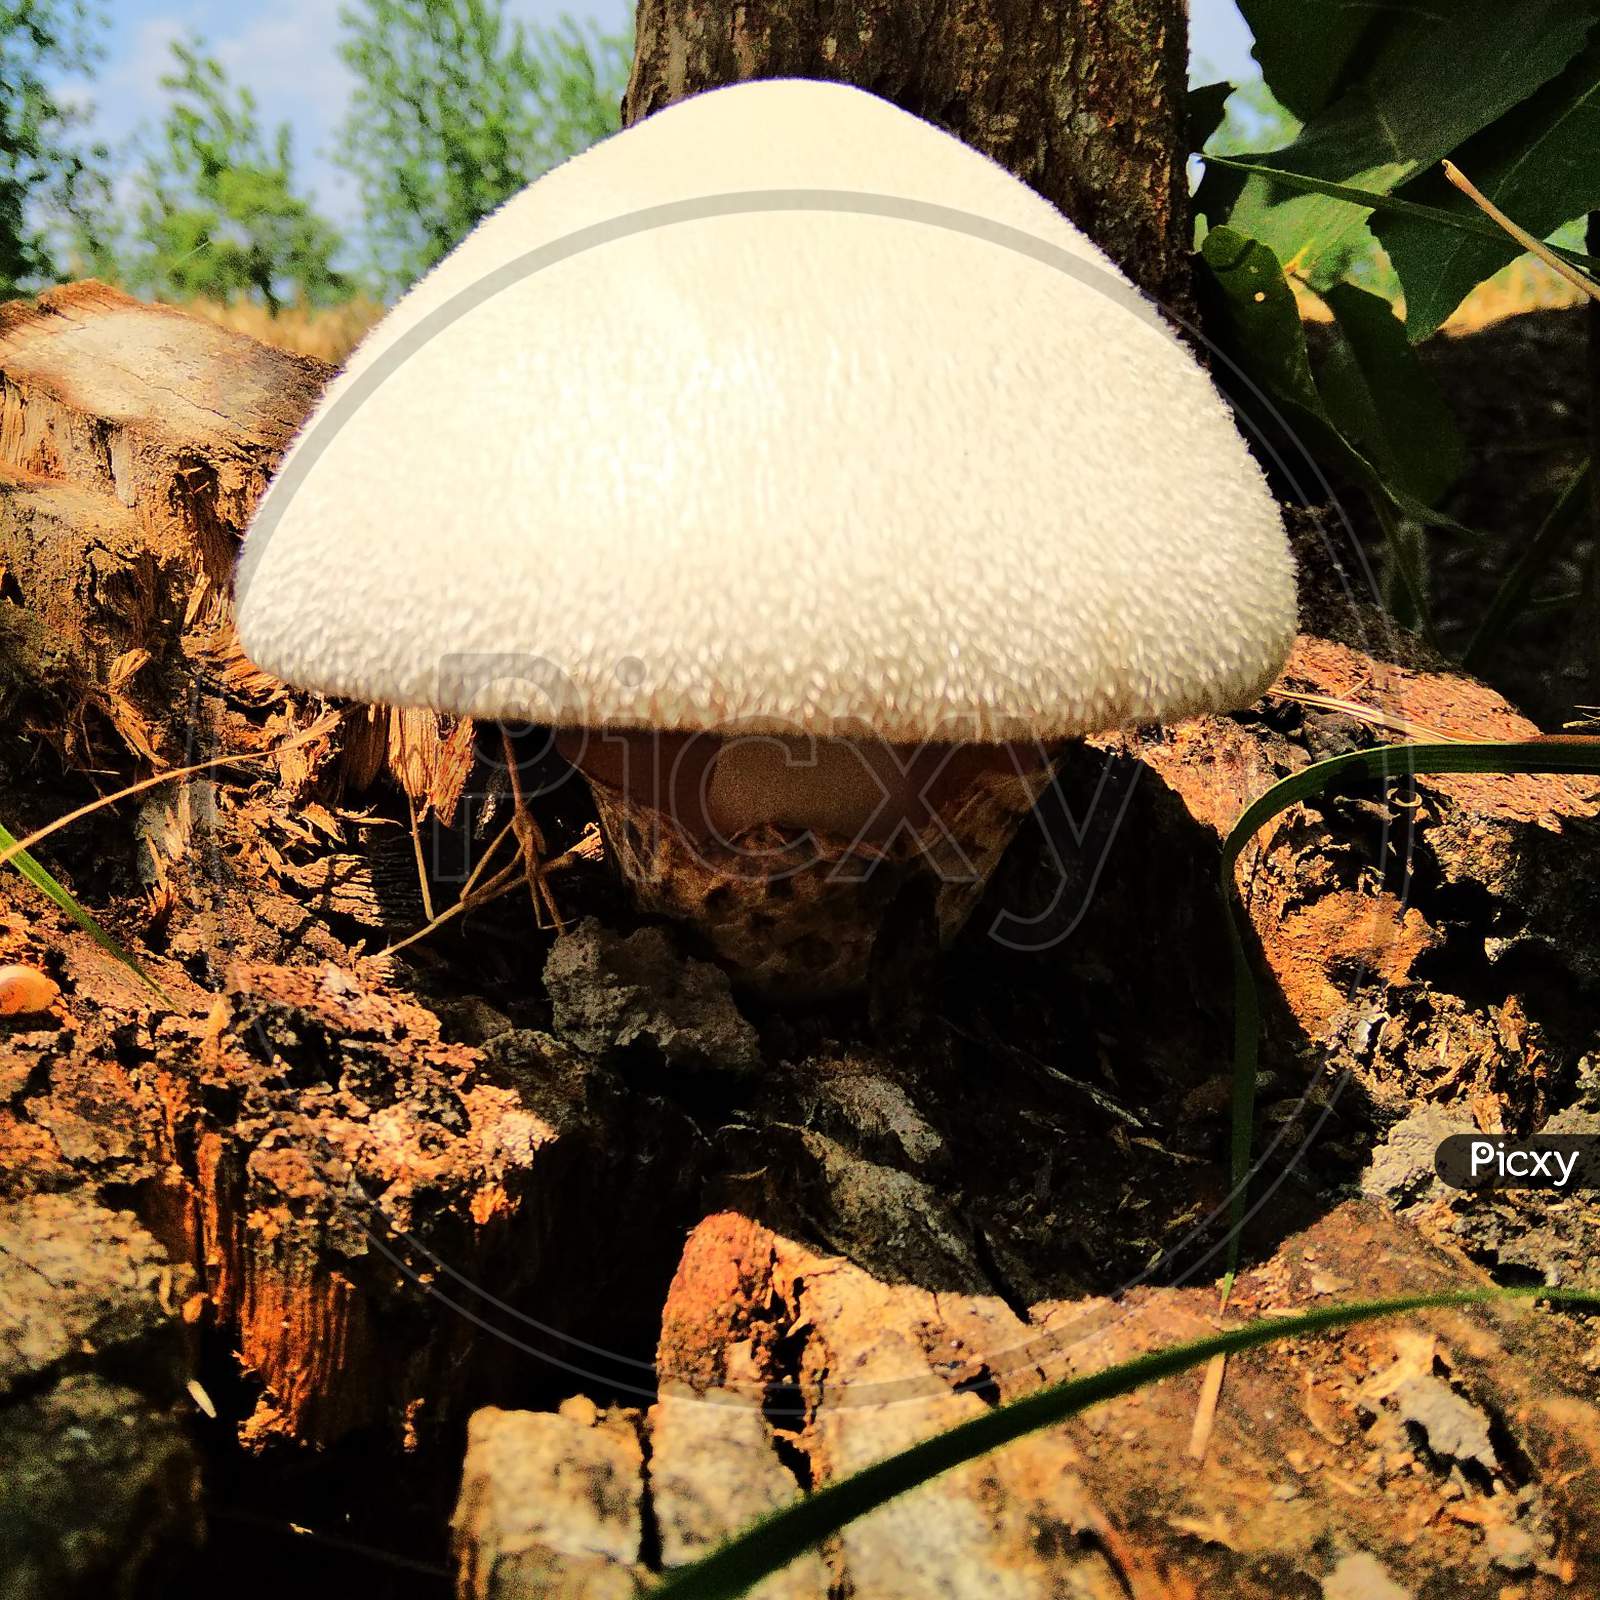 A mushroom or toadstool is the fleshy, spore-bearing fruiting body of a fungus